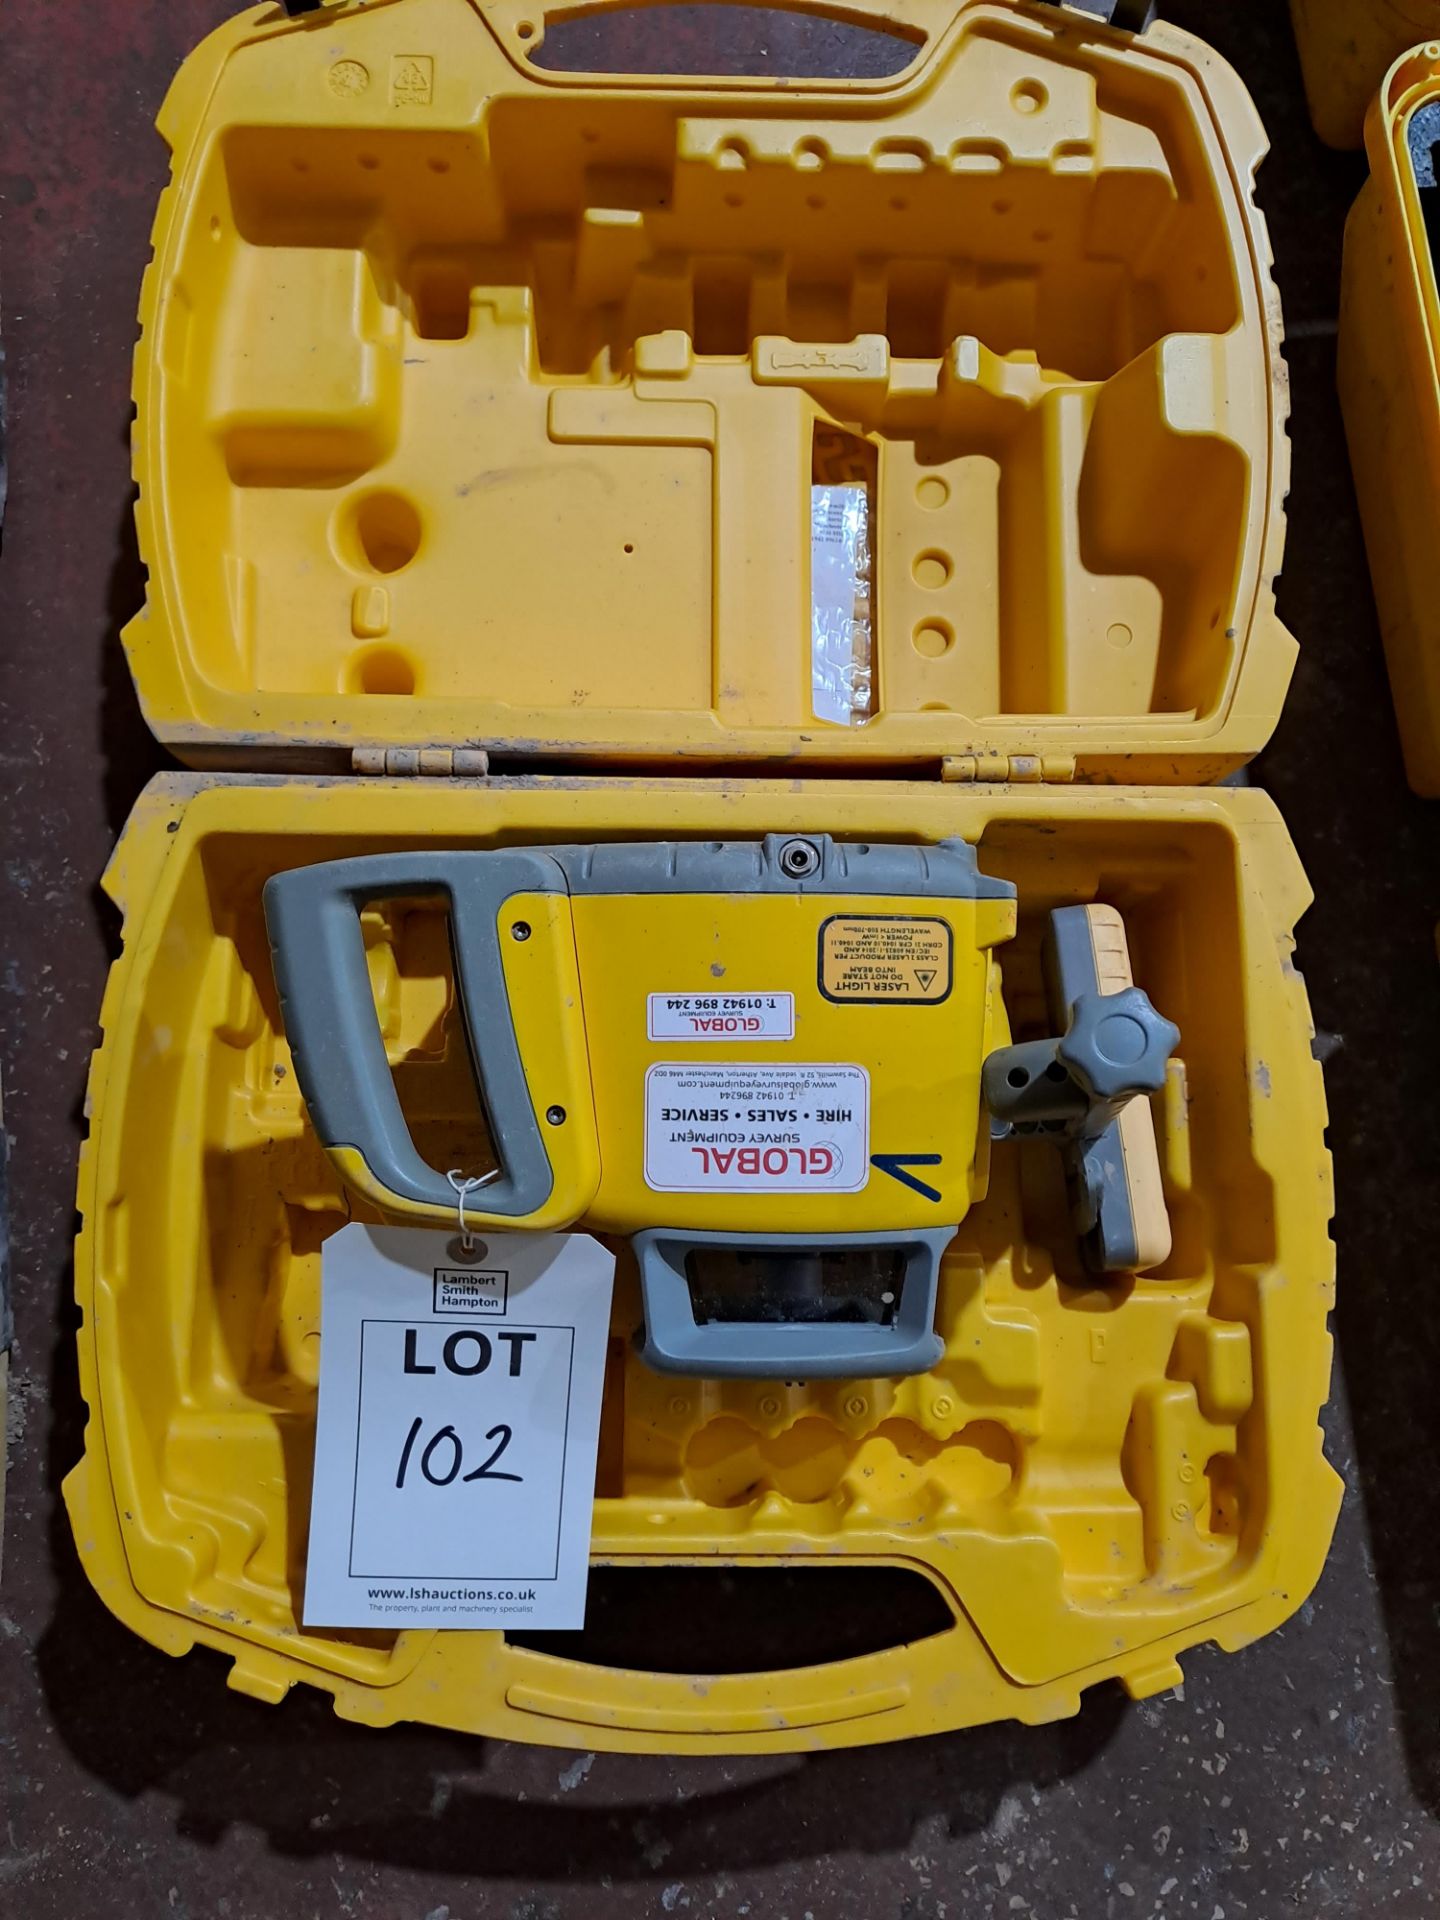 Trimble LL300N Spectra Precision laser level, serial no. 21173438, with Trimble HR320 detector,